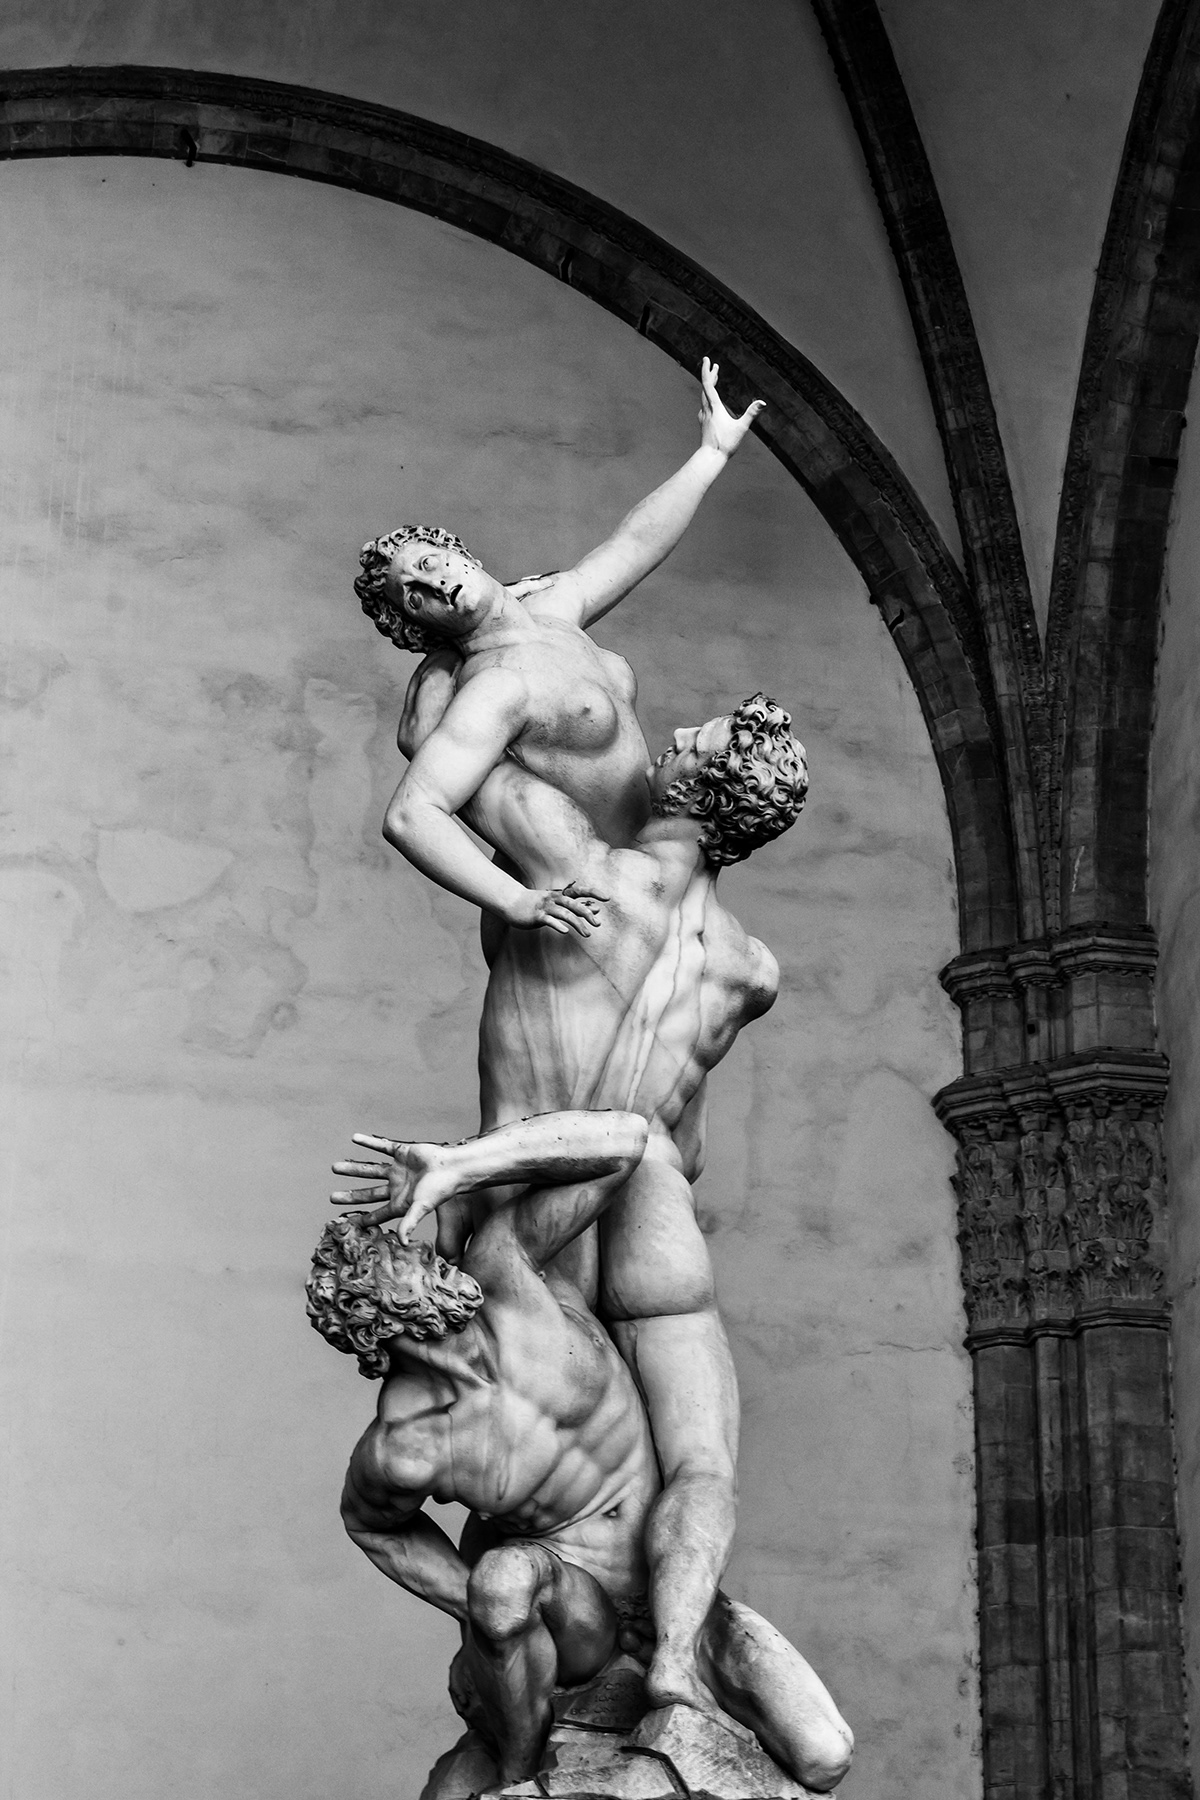 italian  Renaissance  statue  Drmatic  gritty  Grunge  dark  emotional  pain  fear  black and White